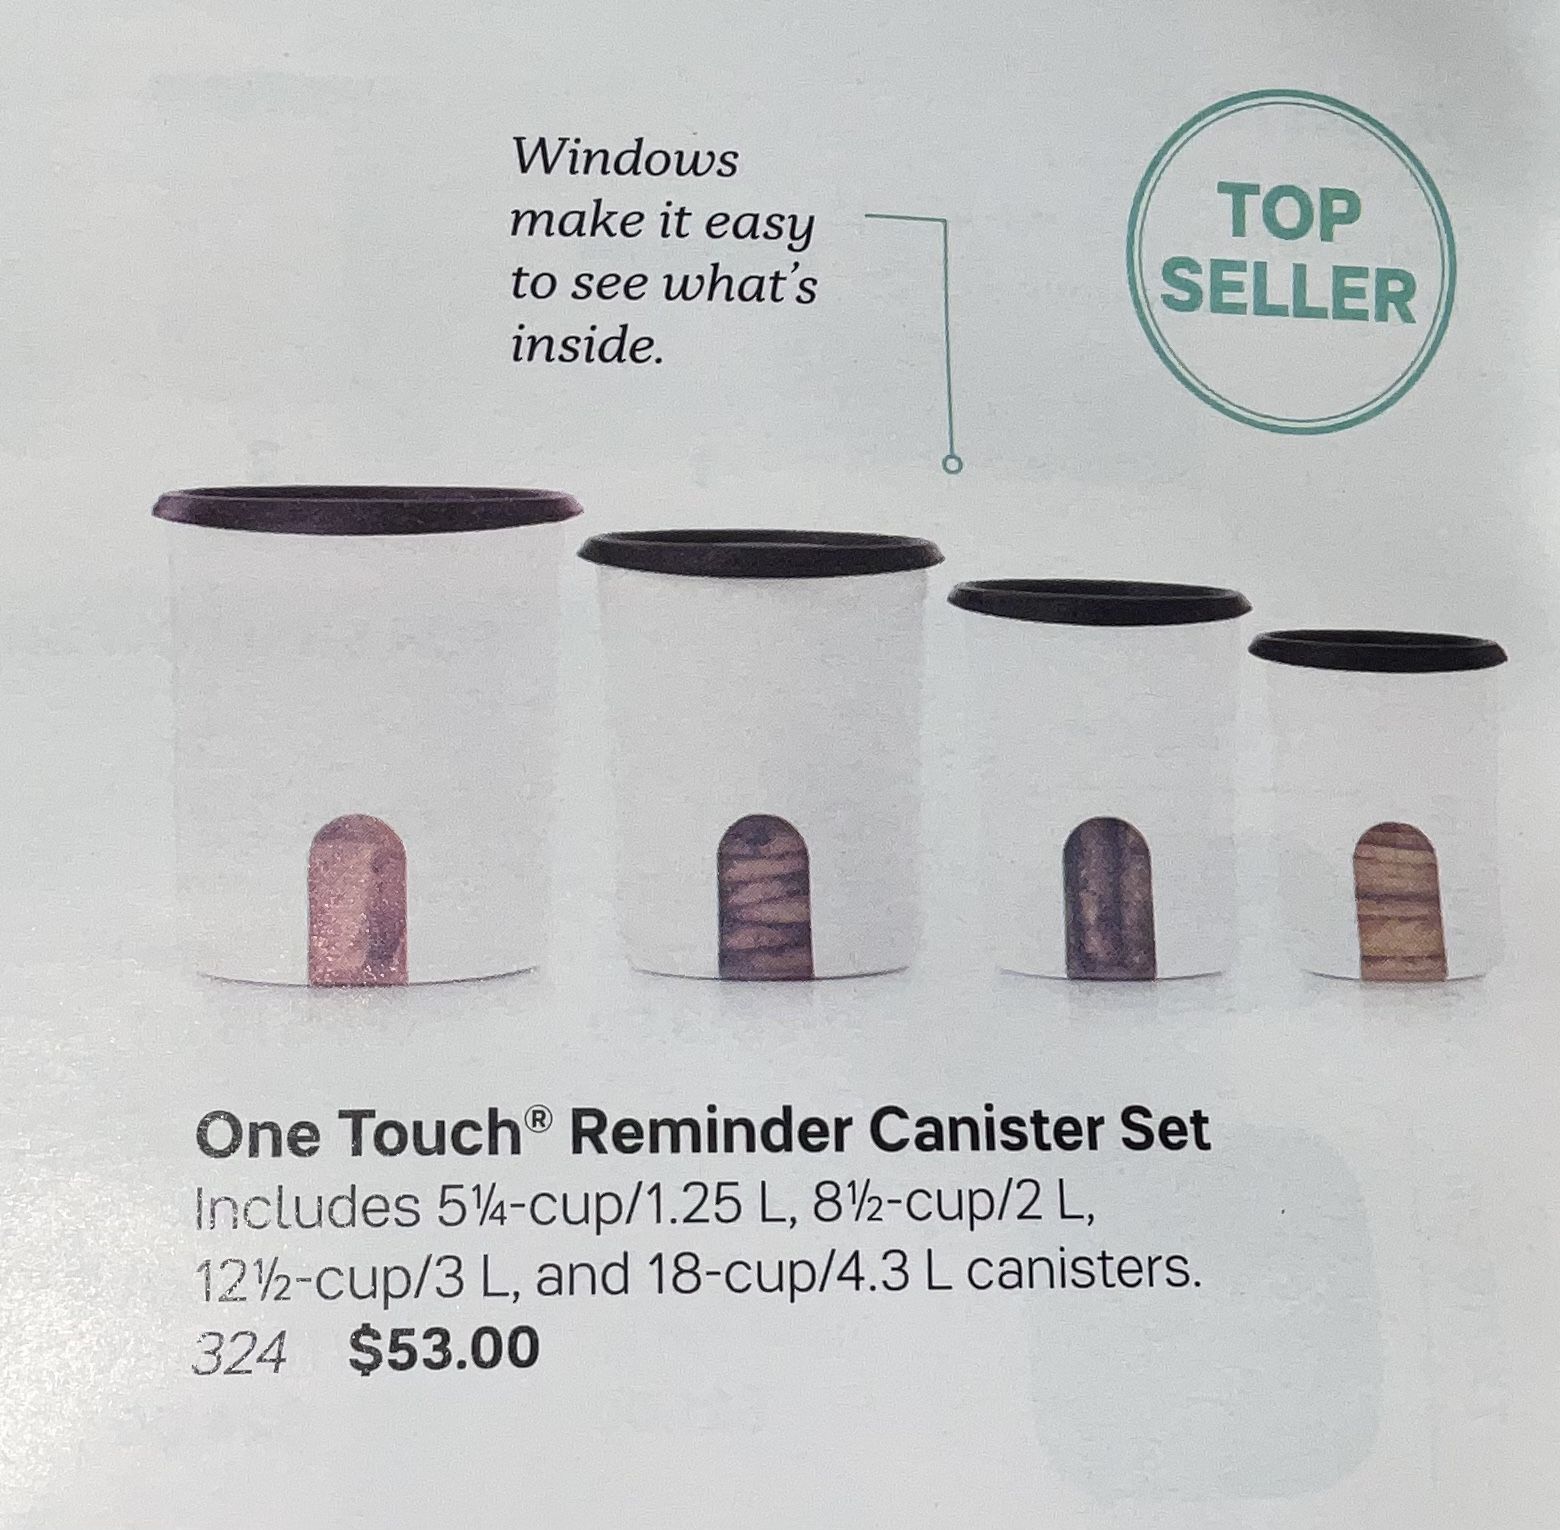 One Touch® Reminder Canister Set (Black)